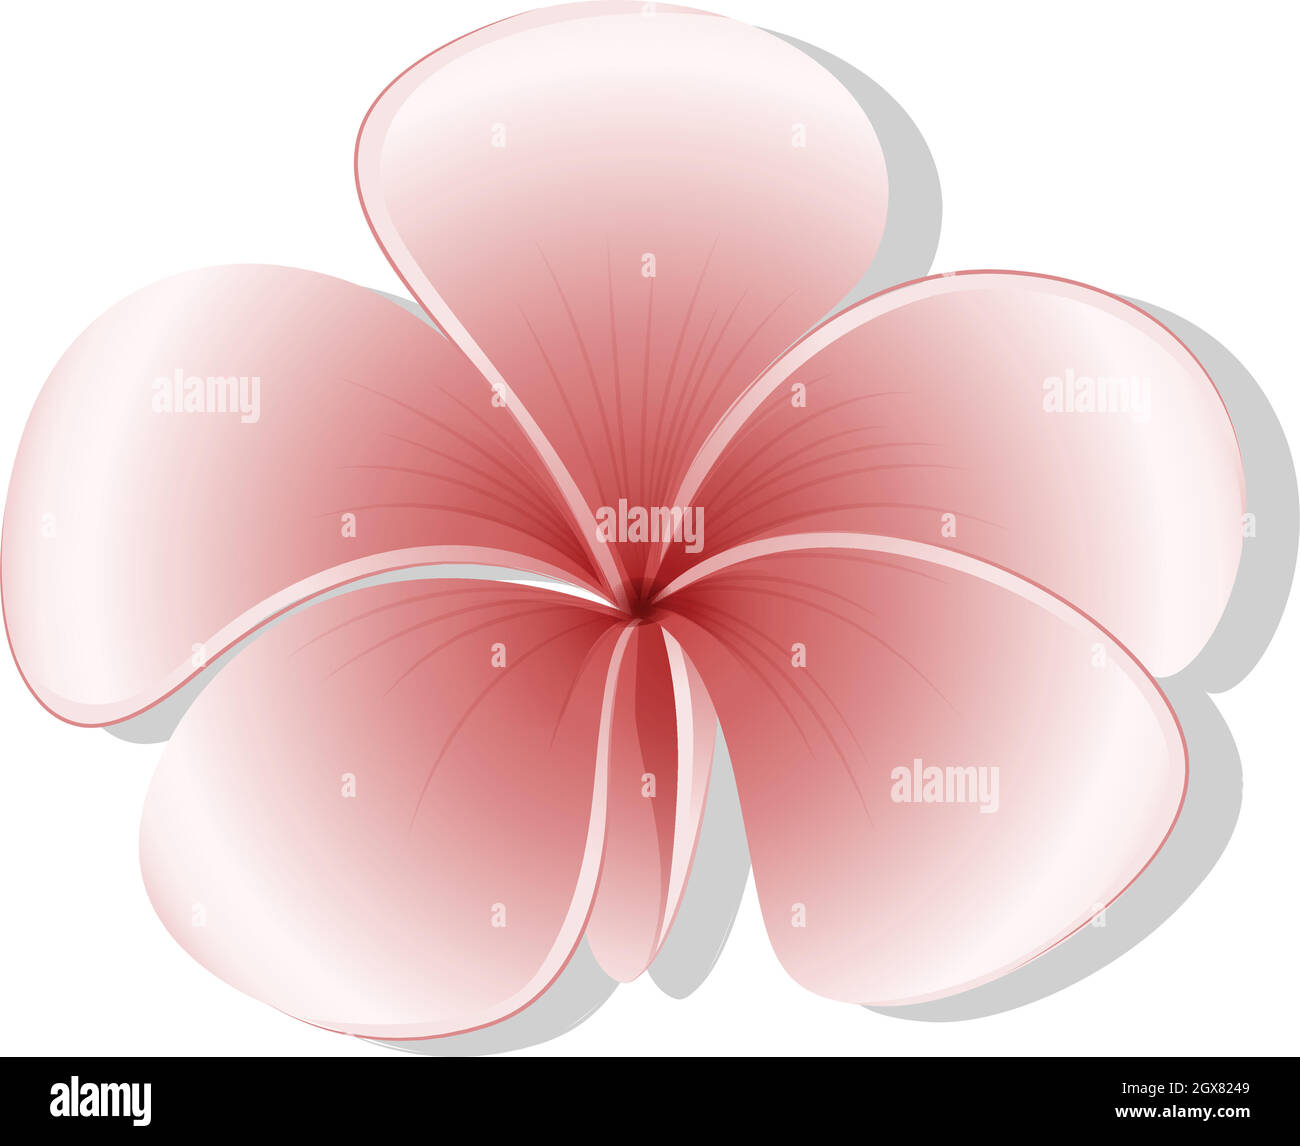 A light colored flower Stock Vector